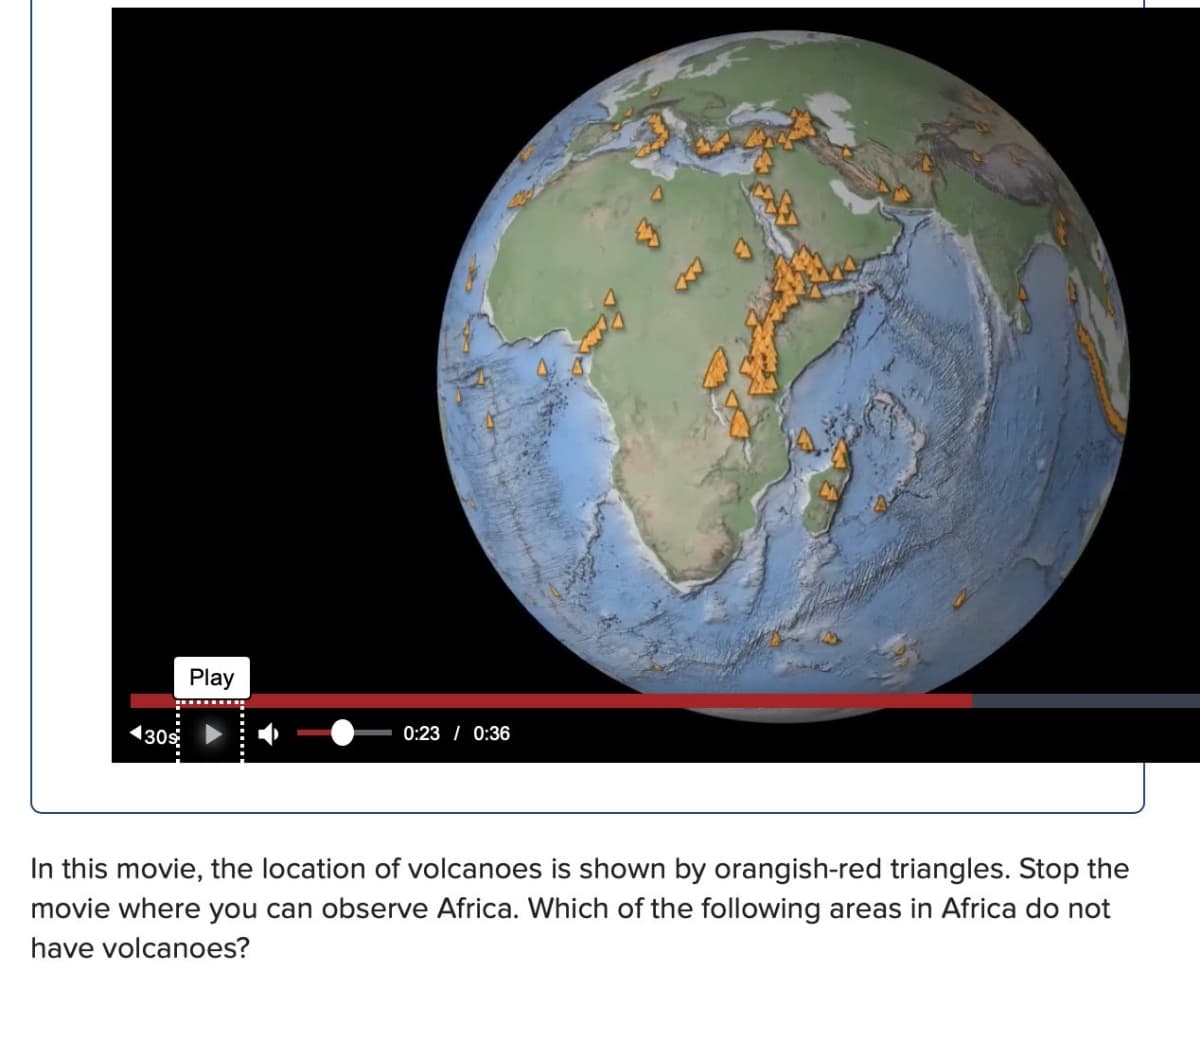 ◄309
Play
**********
0:23 / 0:36
In this movie, the location of volcanoes is shown by orangish-red triangles. Stop the
movie where you can observe Africa. Which of the following areas in Africa do not
have volcanoes?